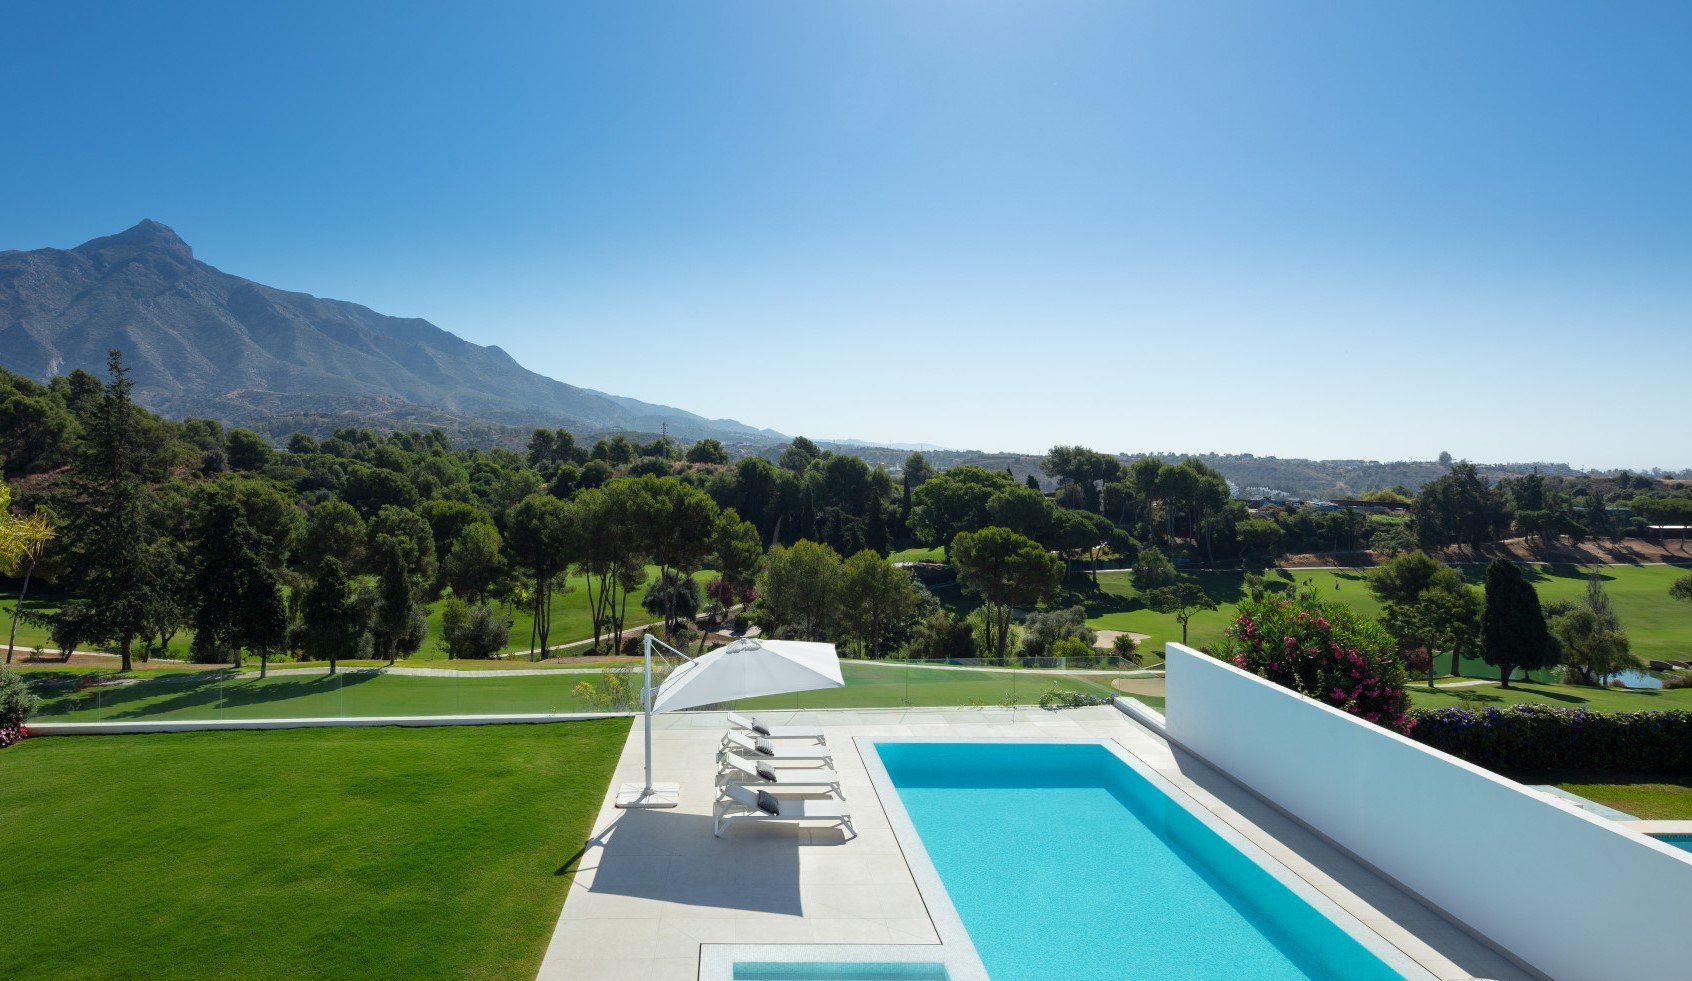 Marbella continues to be a top destination for luxury real estate